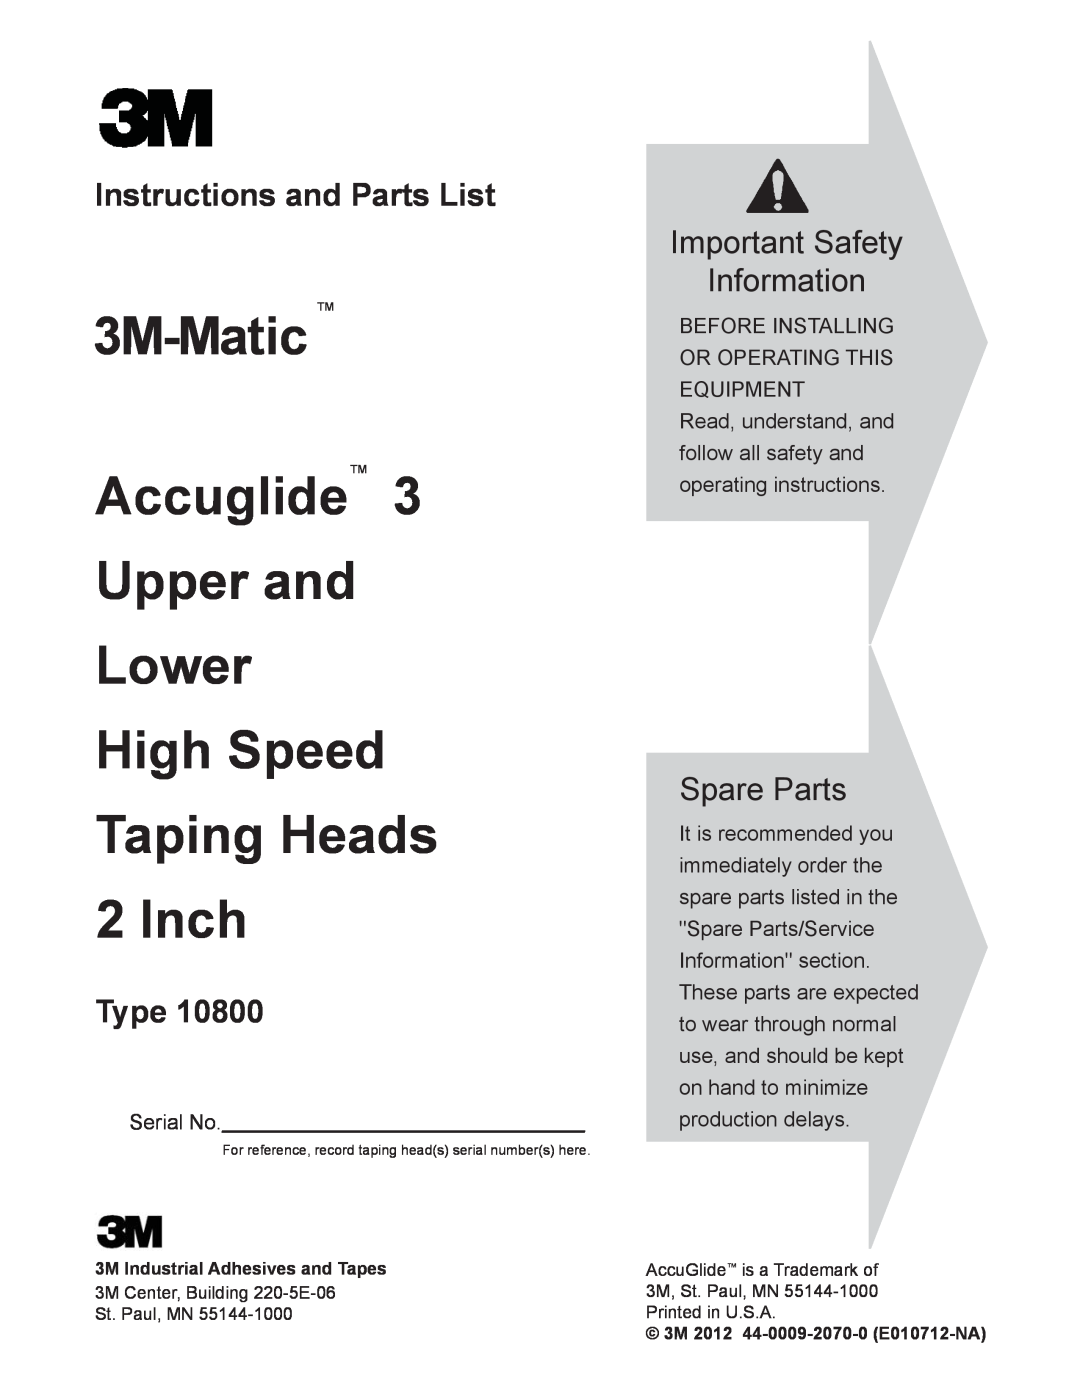 3M 40800 3M-Matic Accuglide Upper and Lower High Speed, Taping Heads 2 Inch, Instructions and Parts List, Type 